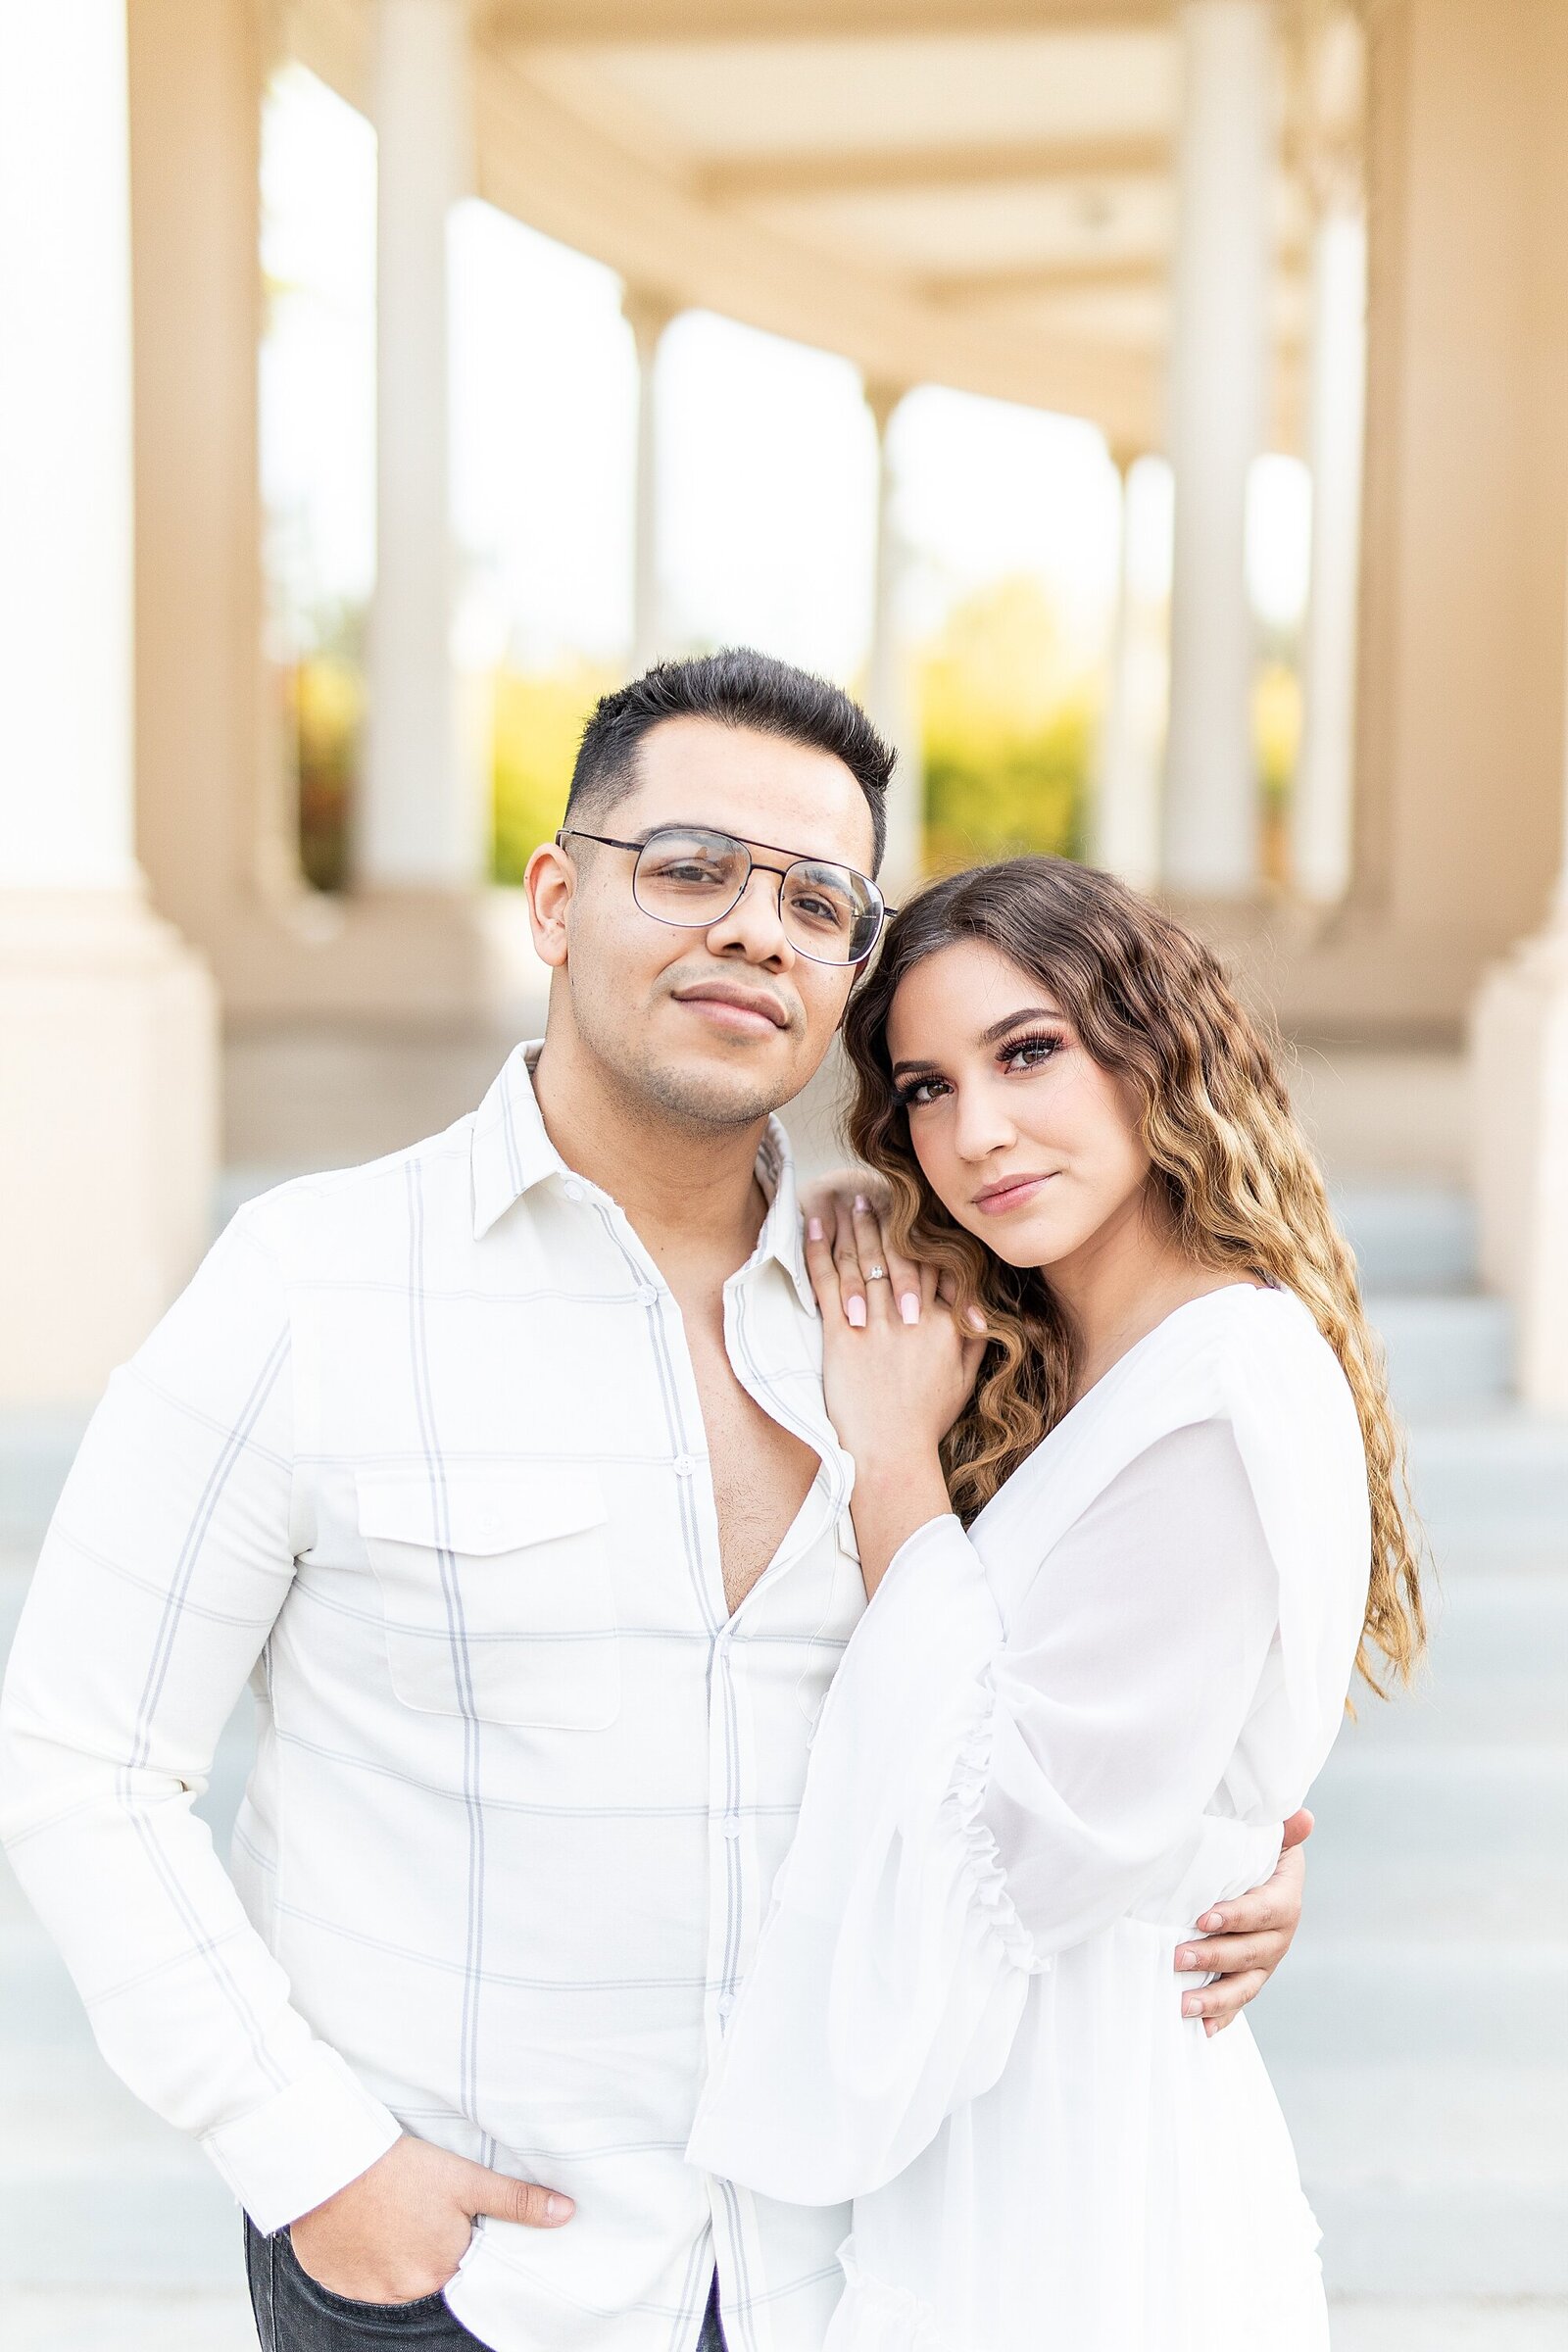 Balboa park engagement session with newly engaged couple in San Diego, California.